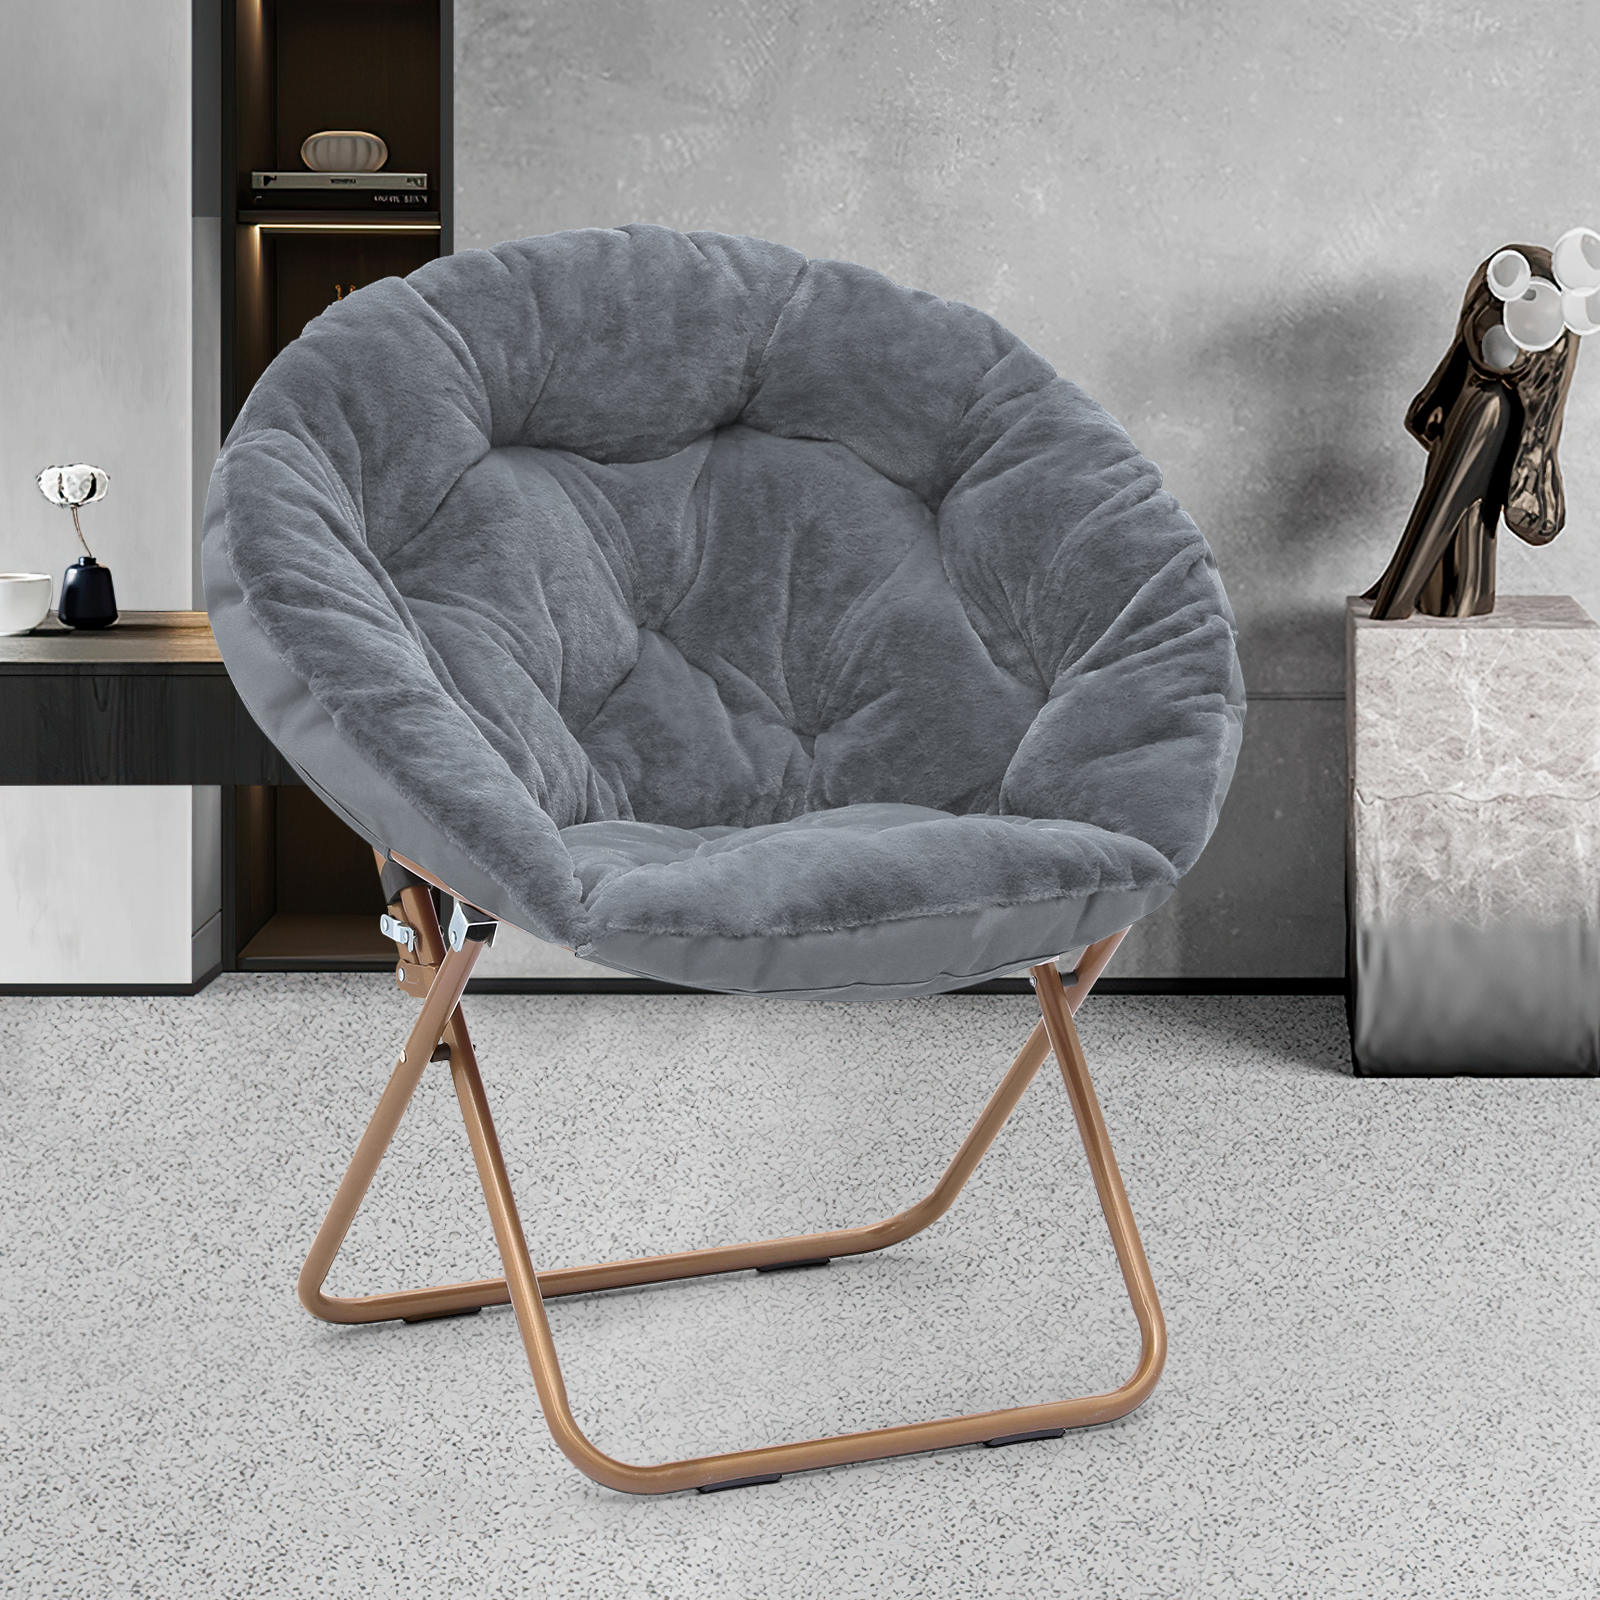 Magshion 33" Folding Saucer Chair, Soft Faux Fur Oversized Collapsible Accent Chair Lounge Moon Chair with Metal Frame for Bedroom, Gray - image 3 of 10